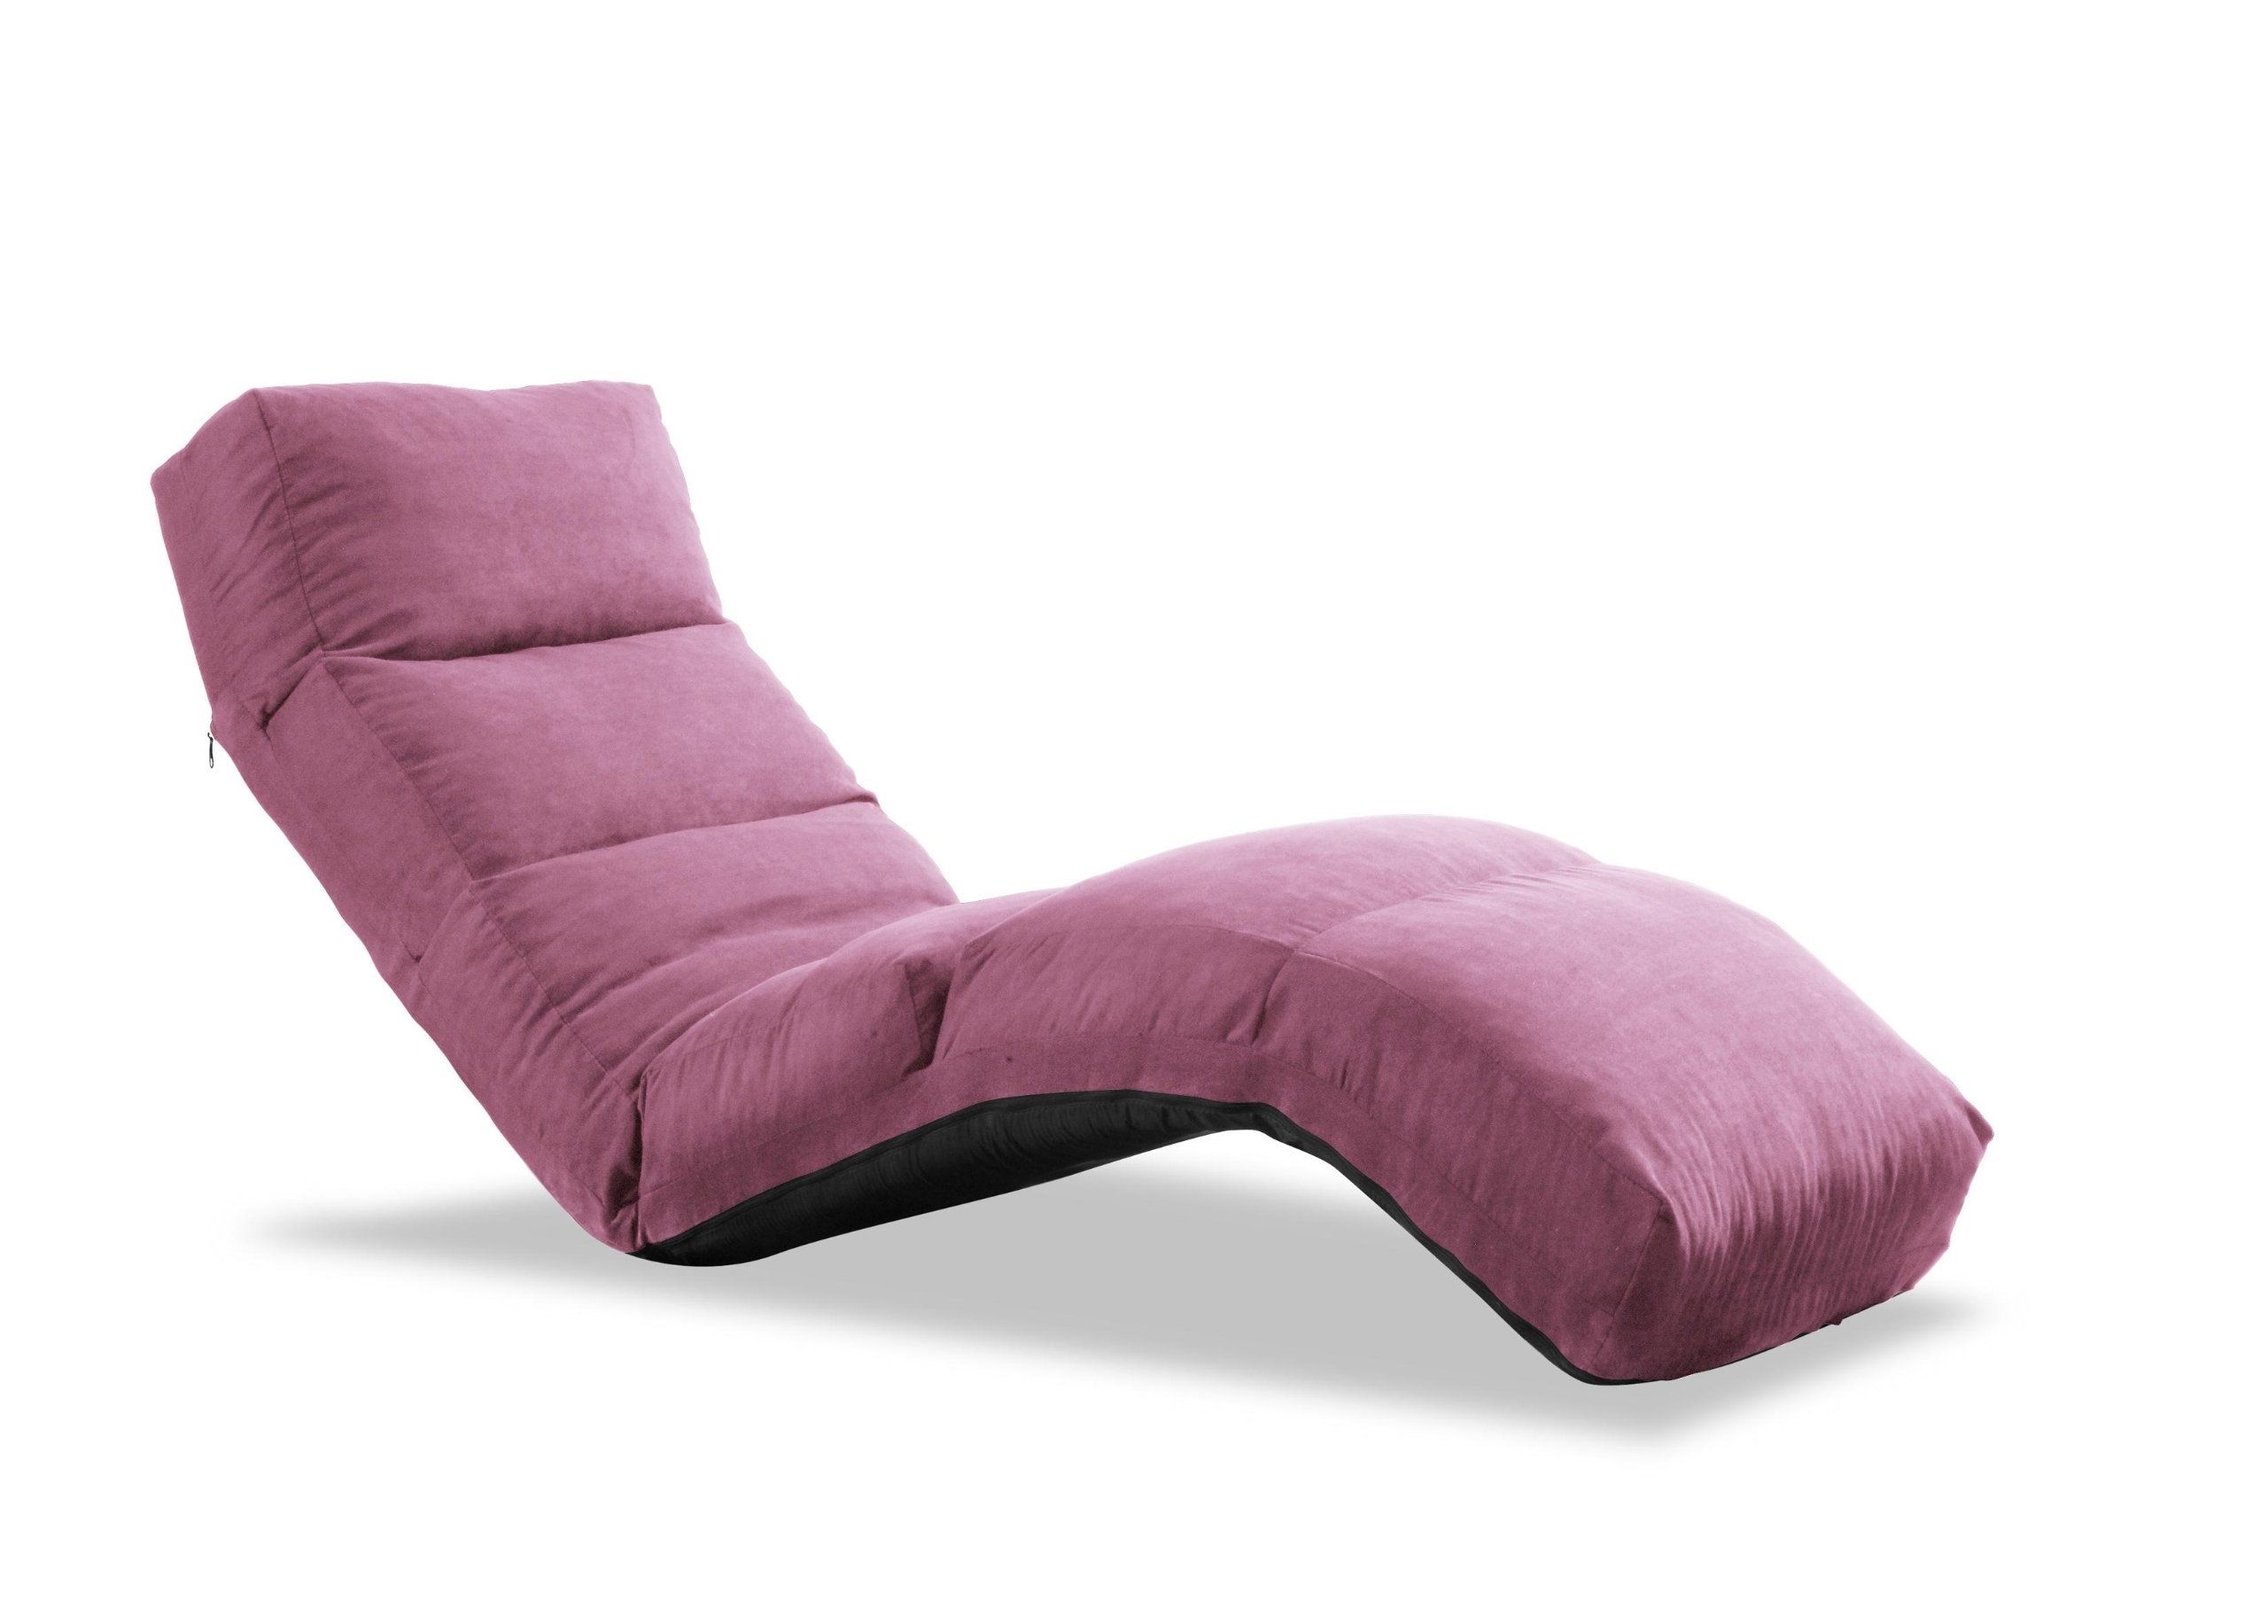 Newest Lifestyle Solutions Jet Curved Chair Chaise Lounge – Pink Intended For Curved Chaises (View 4 of 15)